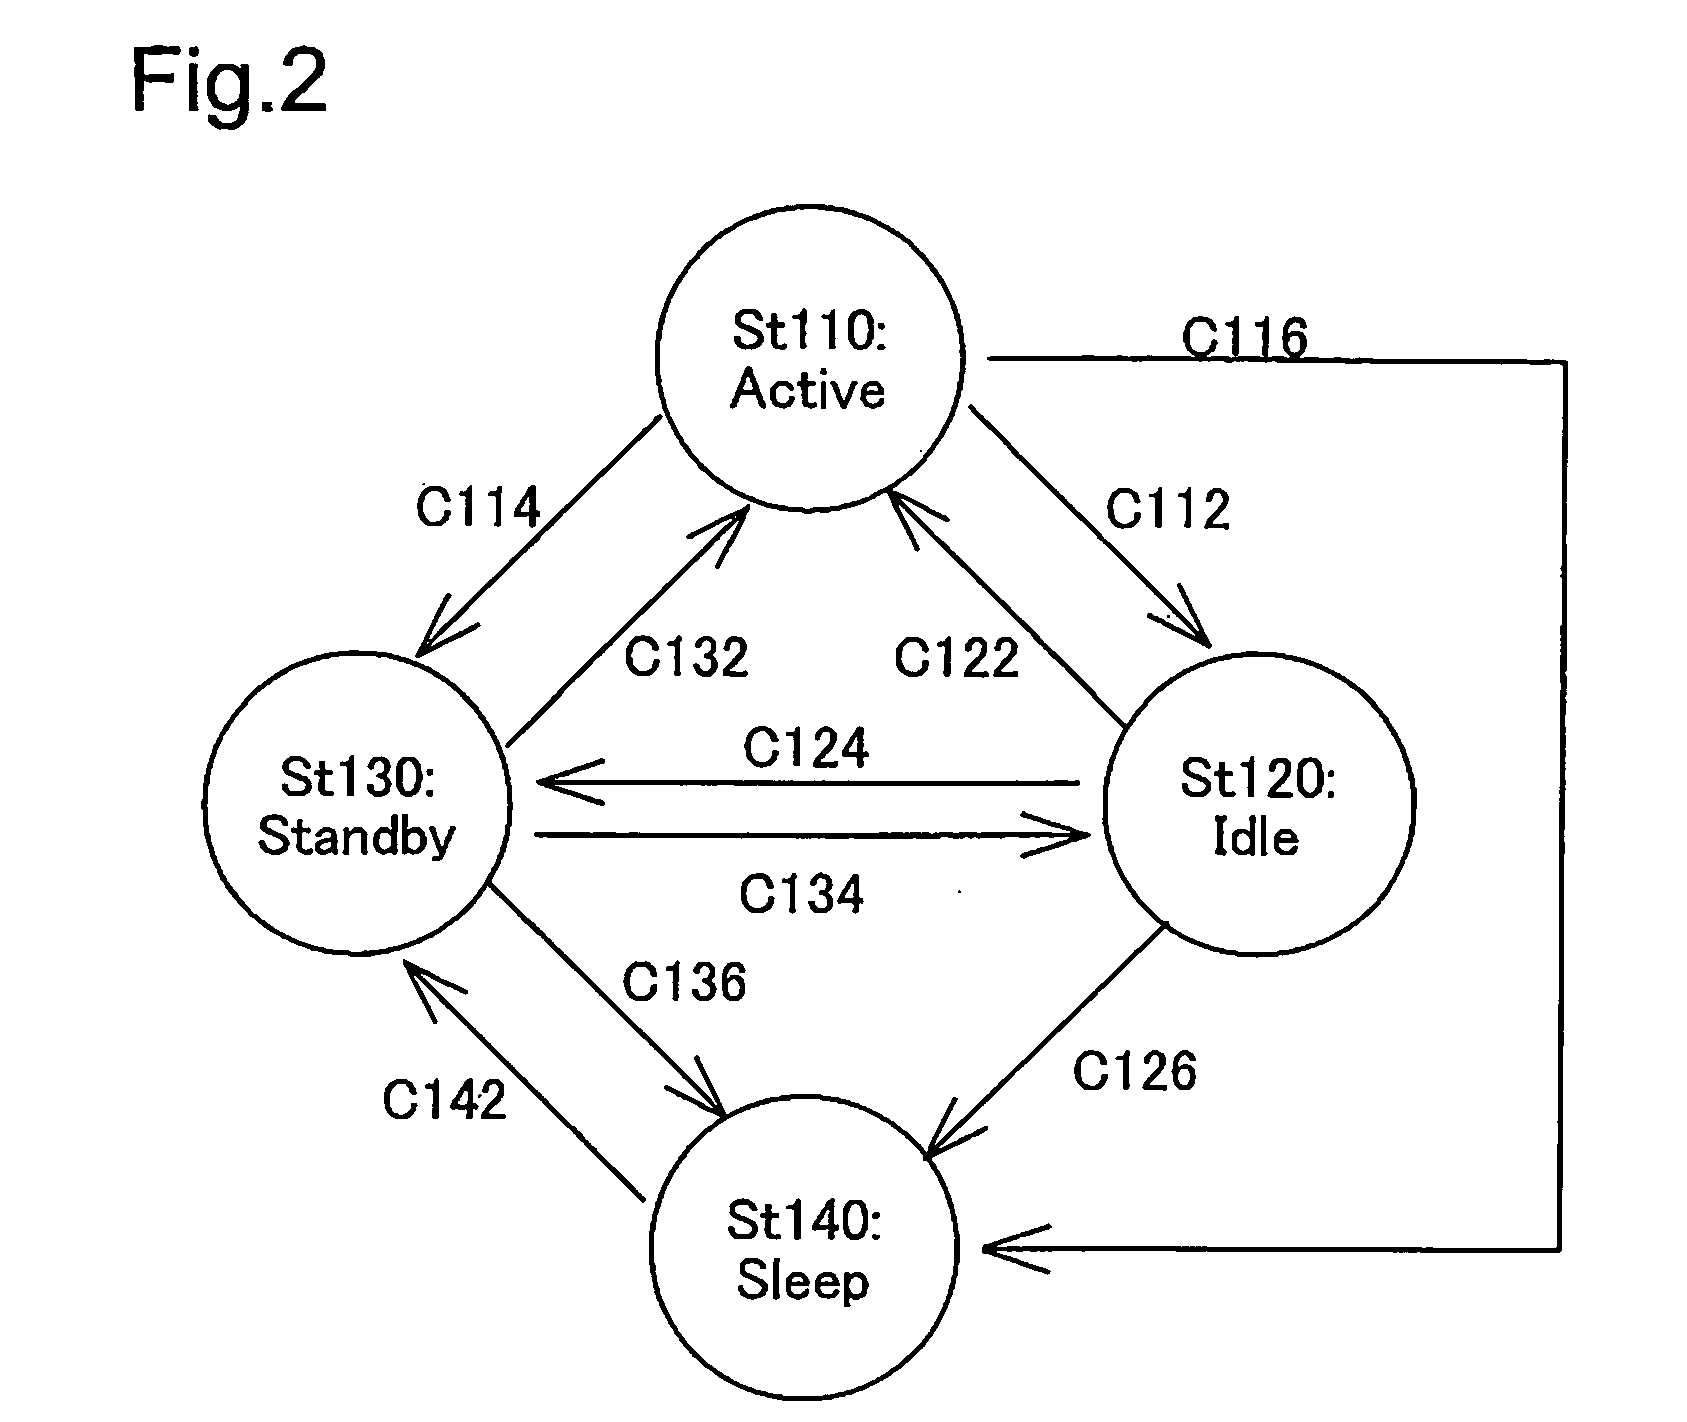 Control of storage system using disk drive device having self-check function